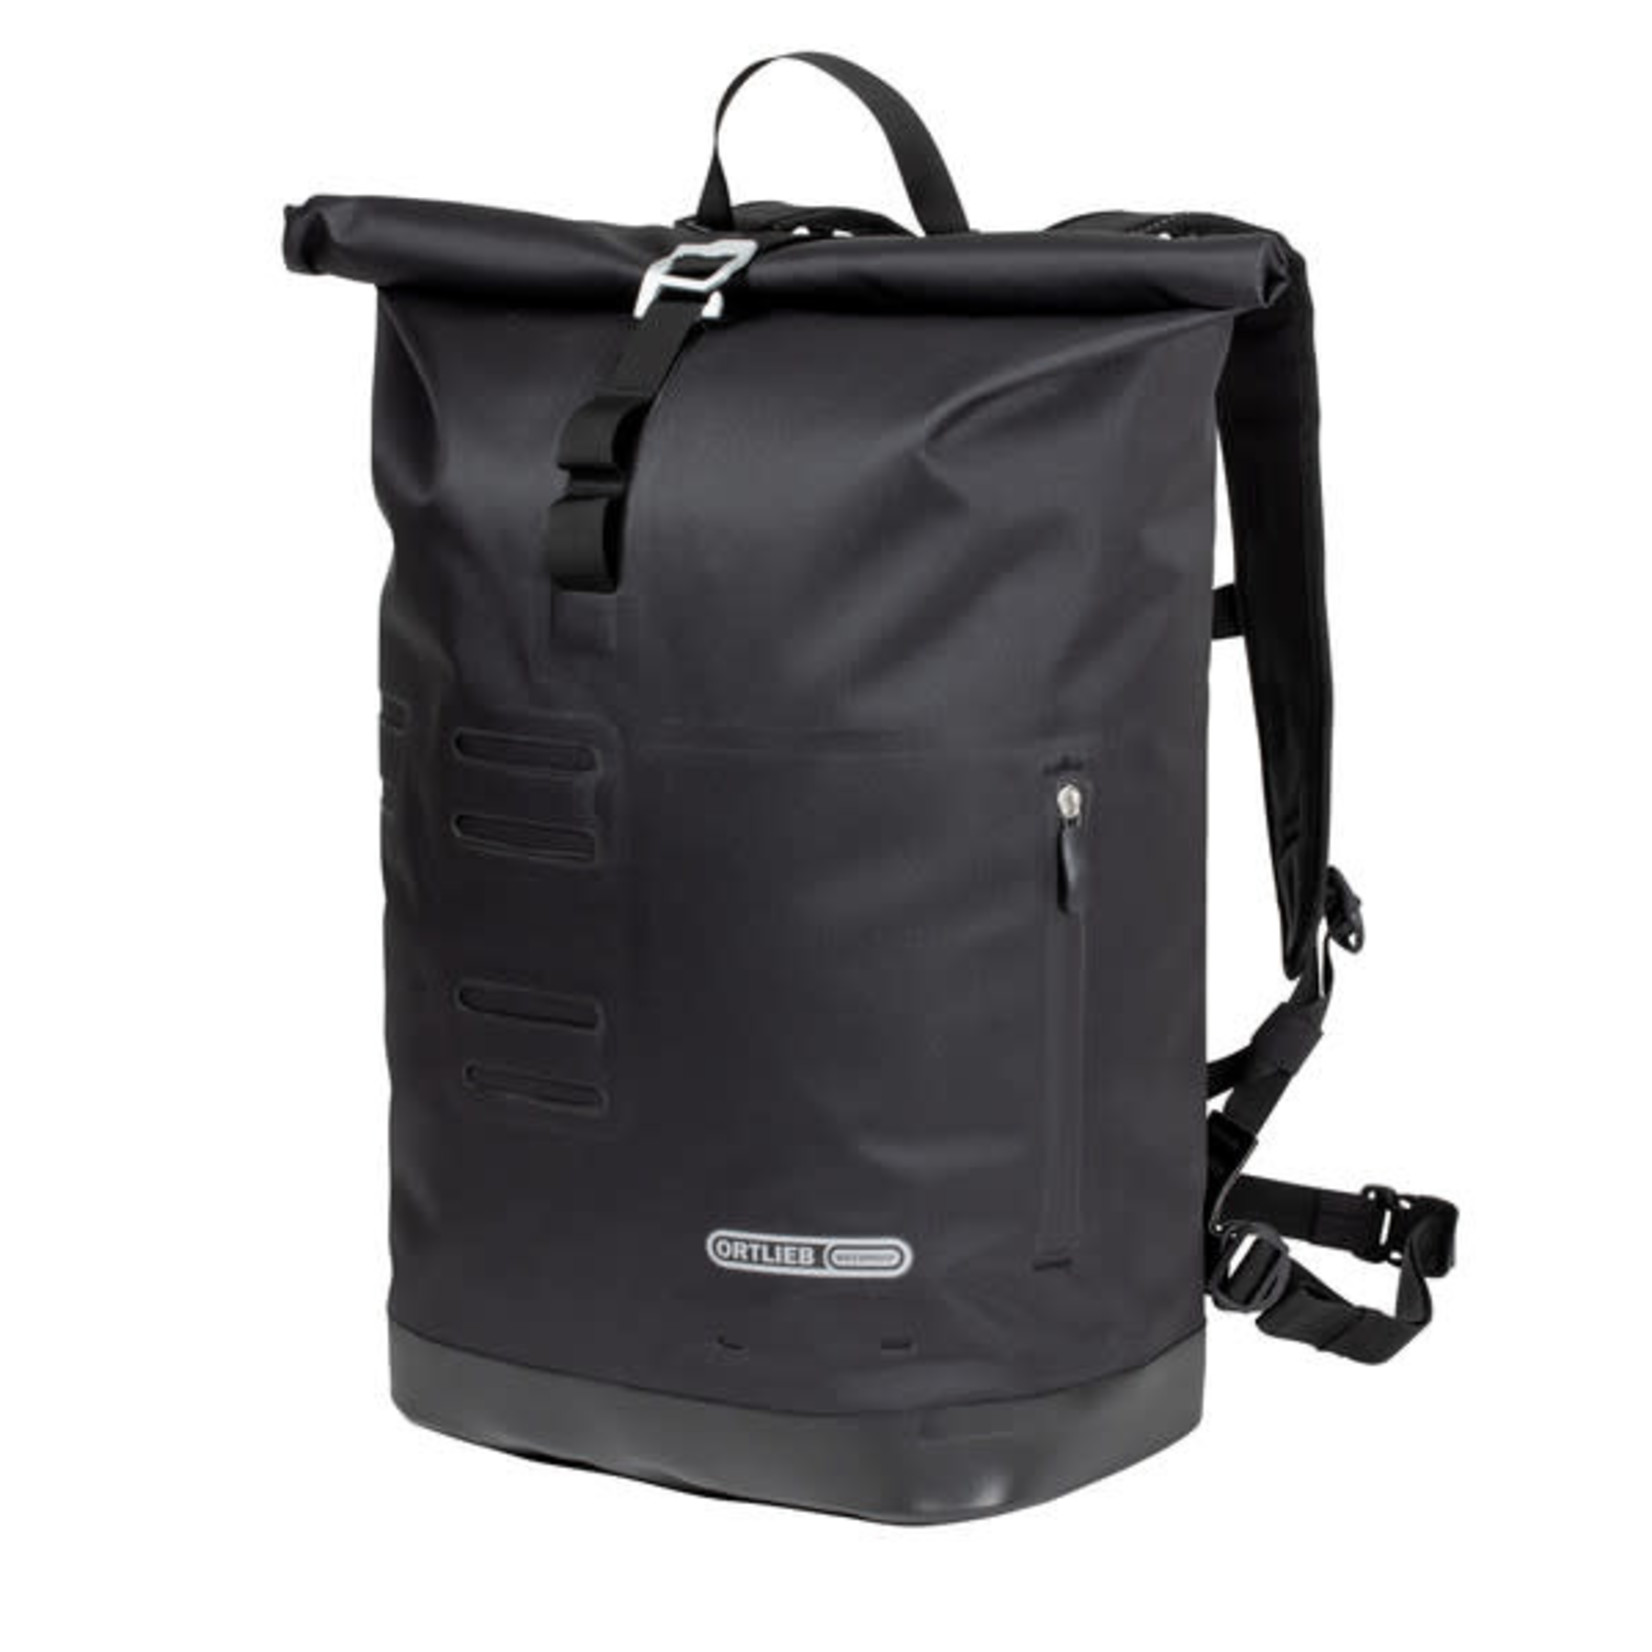 Ortlieb Ortlieb Commuter-Daypack City Backpack R4175 - 27L Black